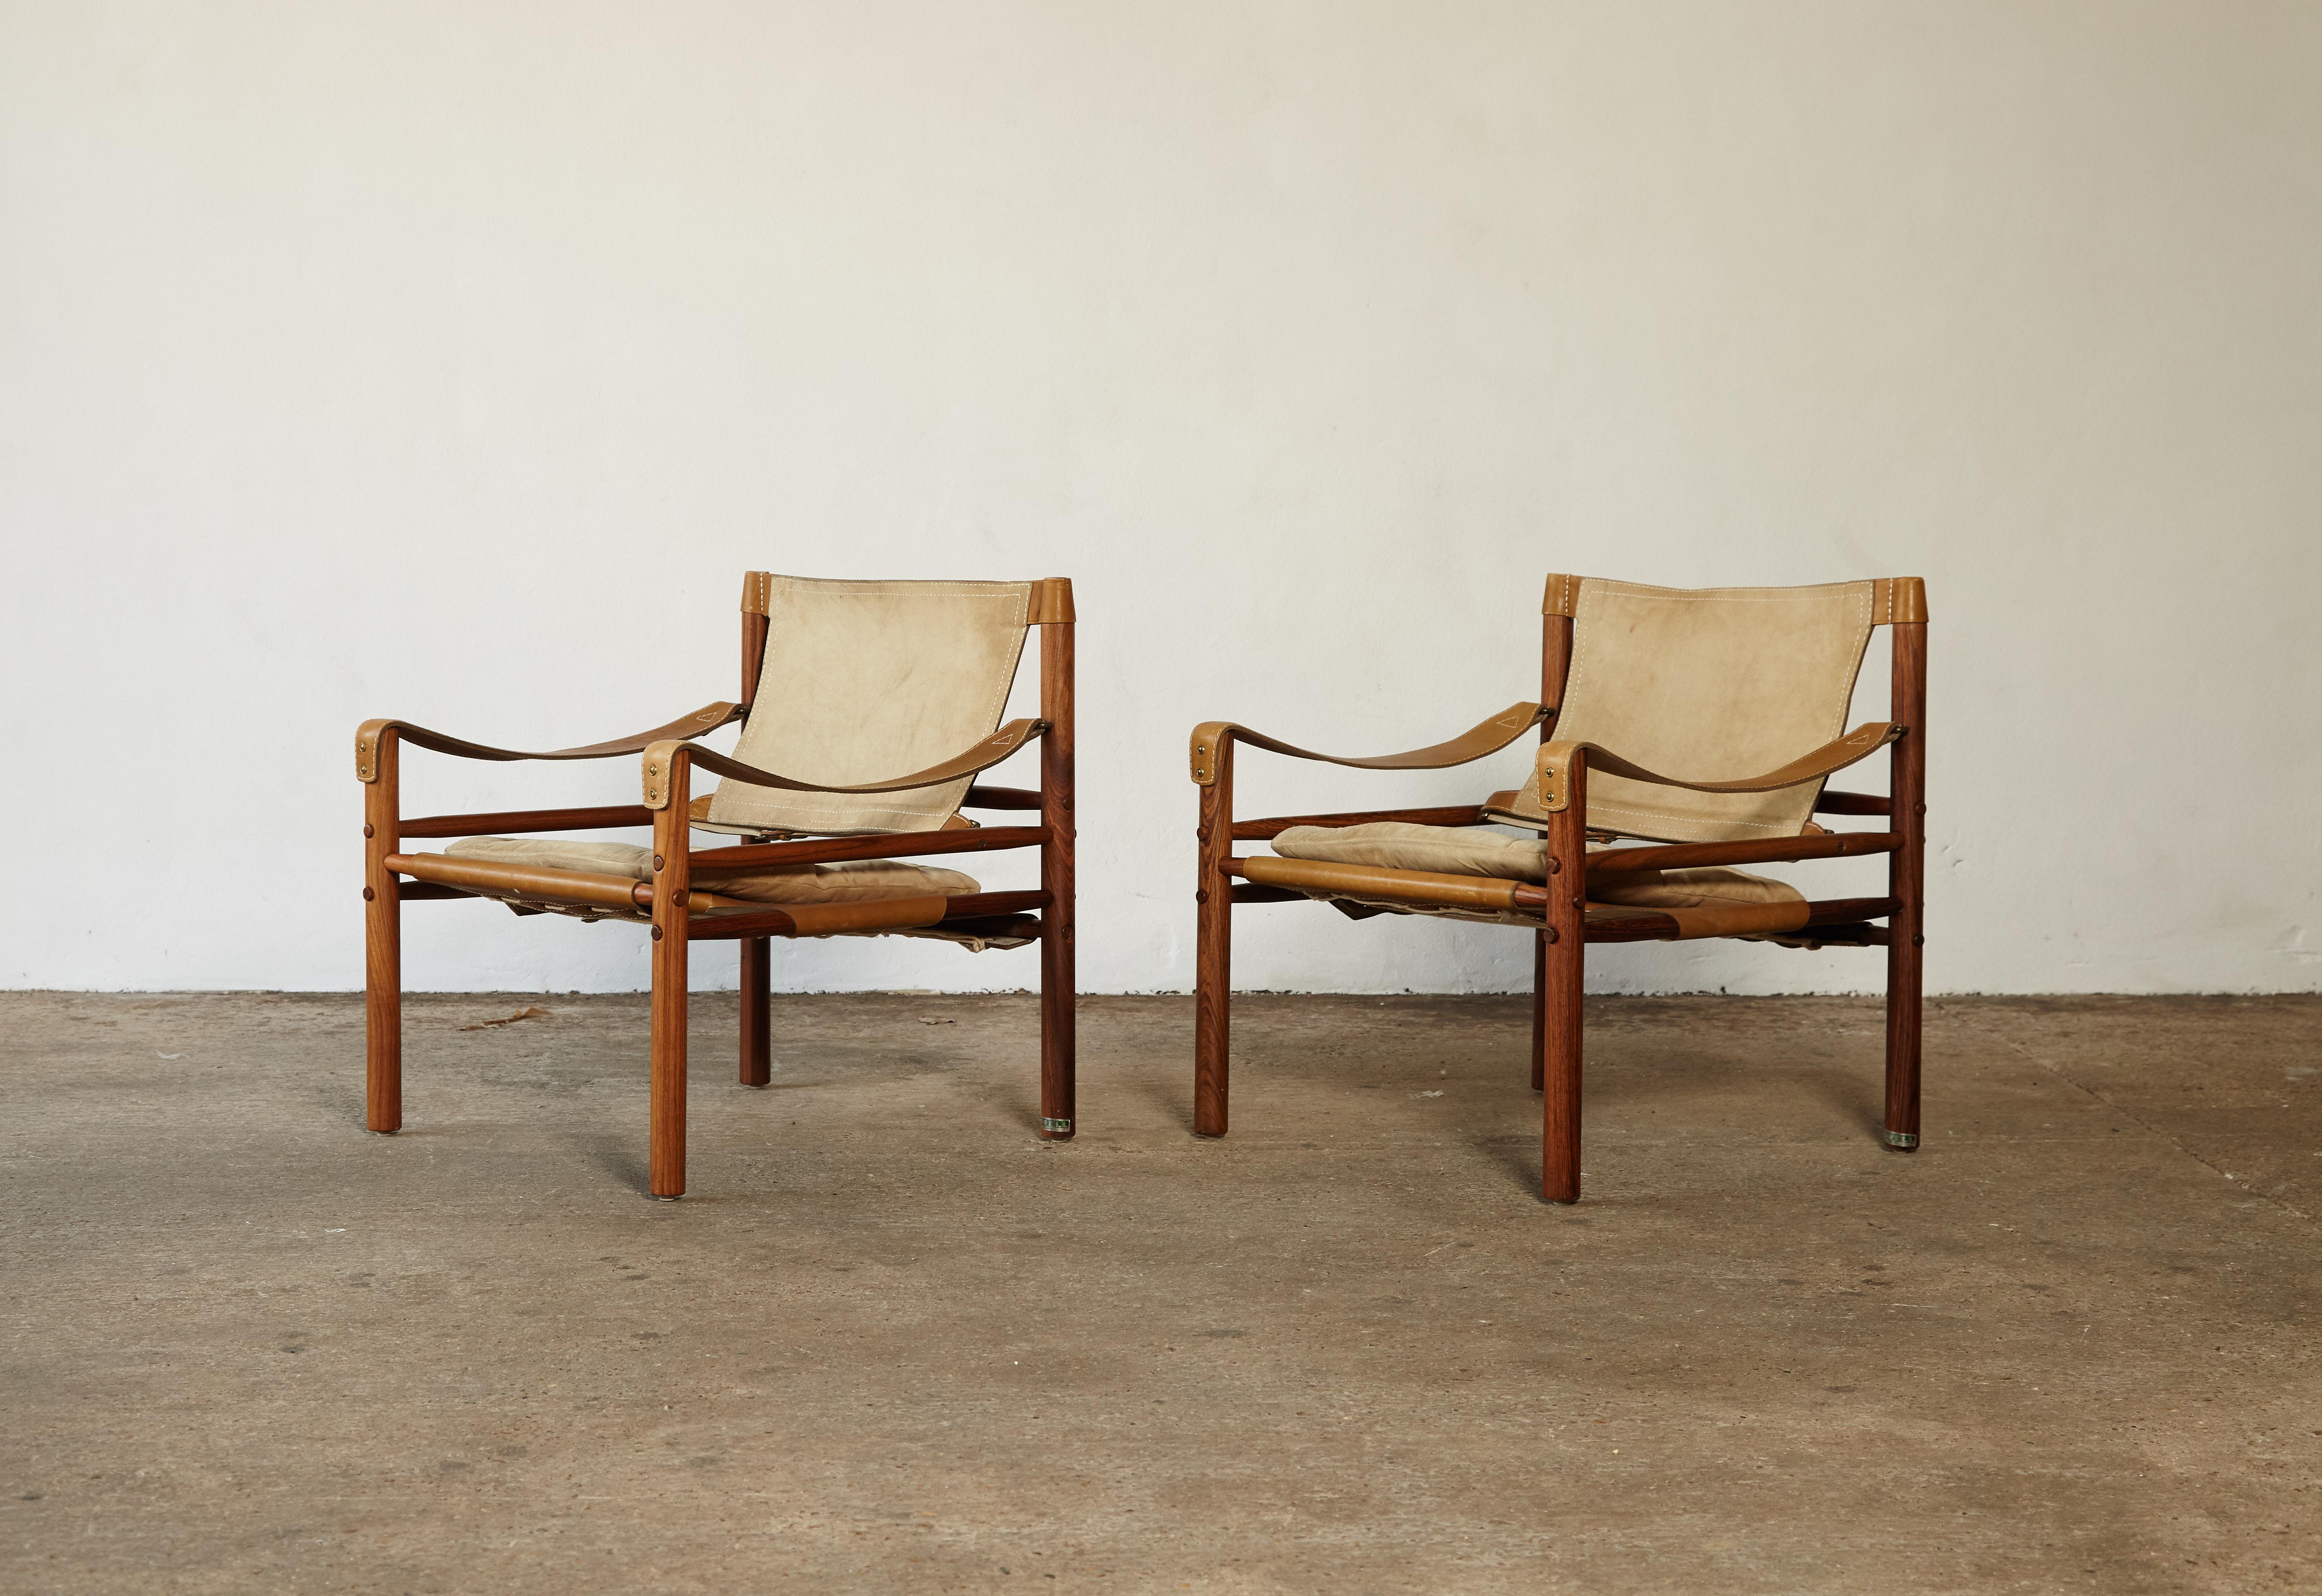 A lovely pair of vintage Arne Norell safari sirocco chairs in very rare suede and rosewood. Made by Norell Mobler in Sweden. Lovely condition. 


The chairs will need to be disassembled for shipping but were designed to be taken apart and put